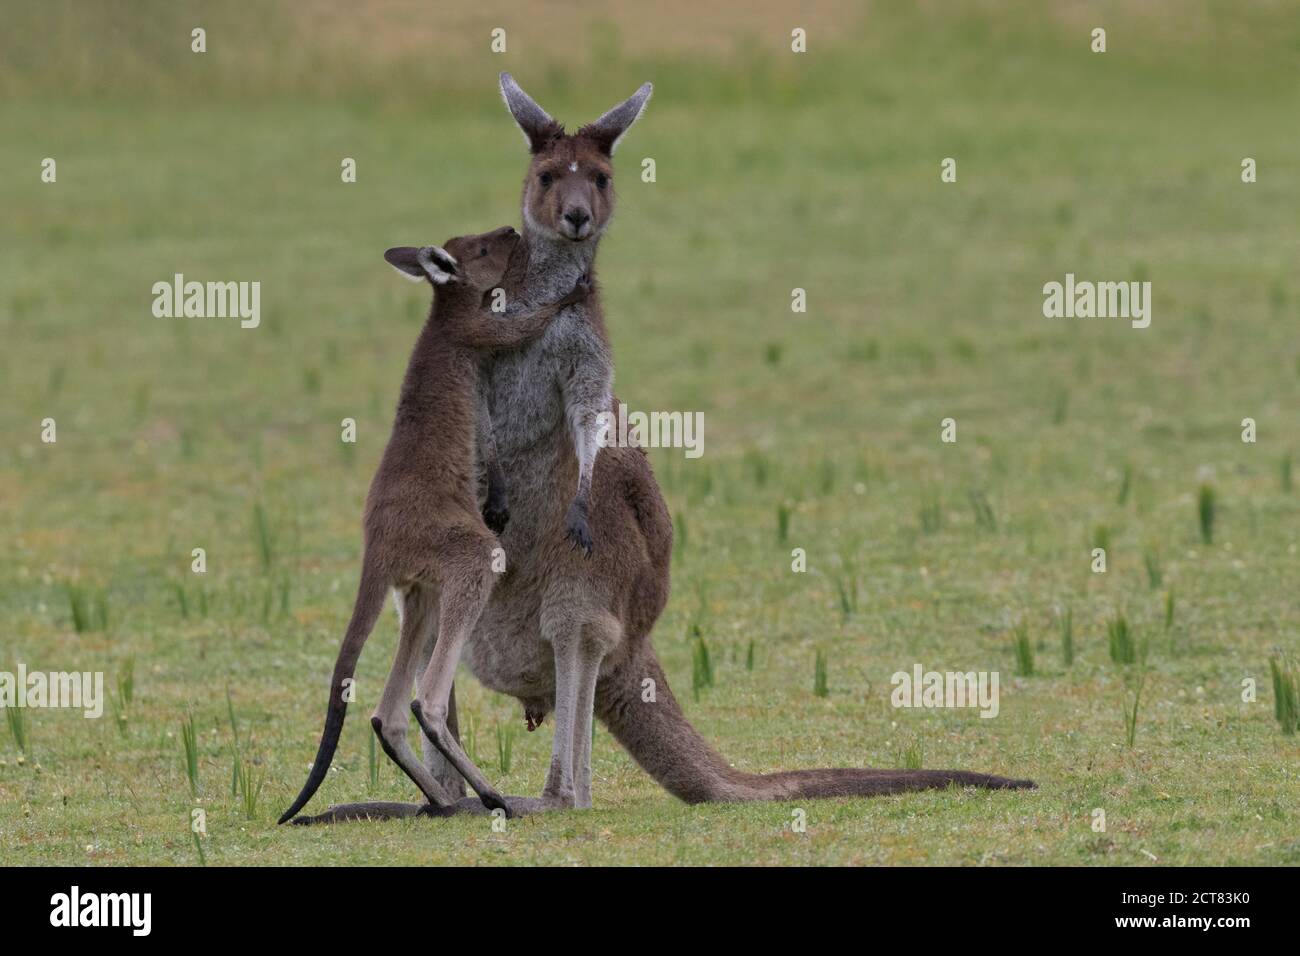 Baby joey stands upright and hugs mother kangaroo. Later, baby will climb into pouch. Location is Yanchep National Park in Western Australia. Stock Photo